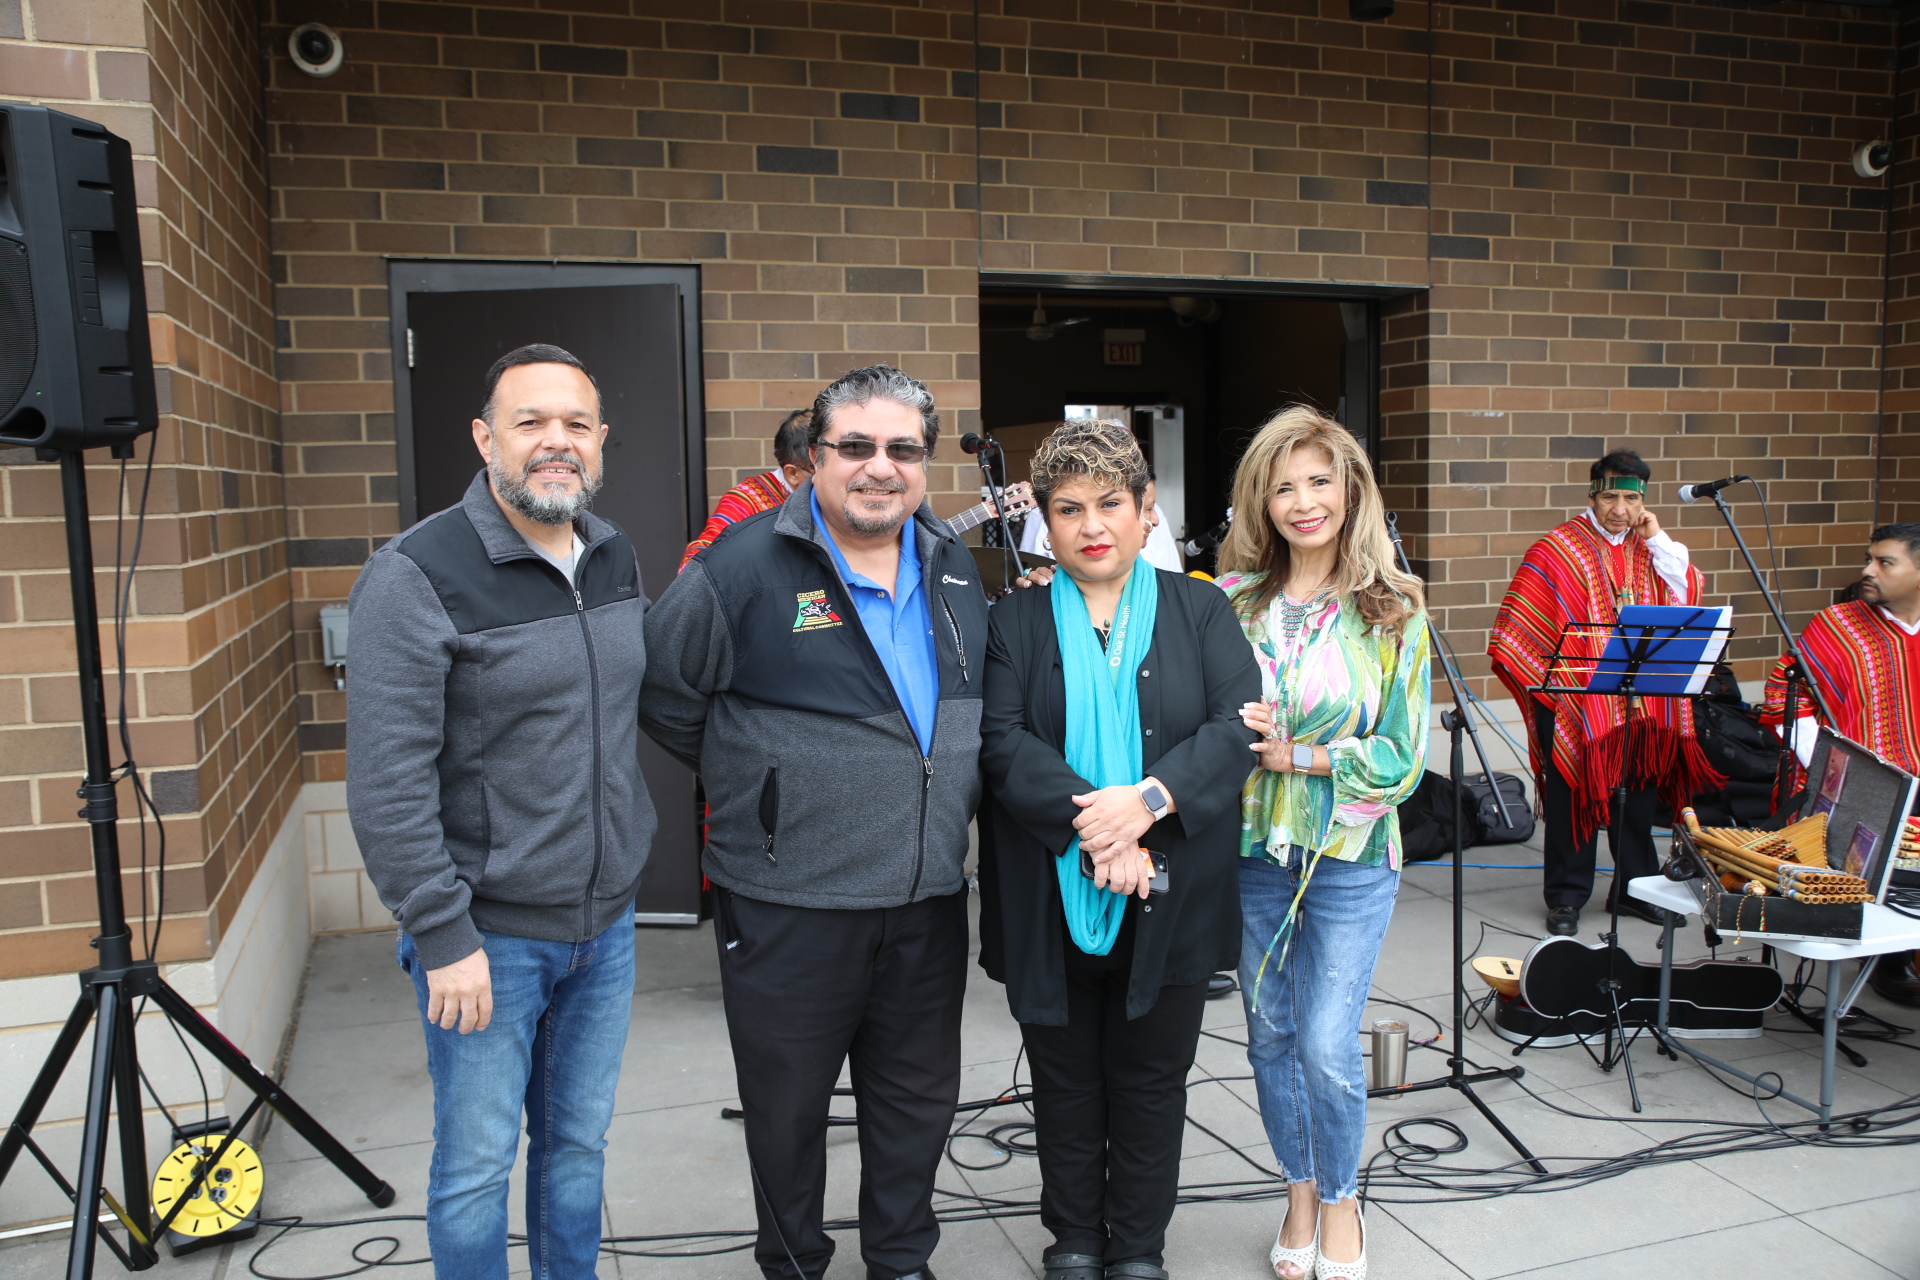 Business Director Ismael Vargas, Cook County Commissioner Frank Aguilar, Cicero Clerk Maria Punzo-Arias, Senior Center Director and Farmer's Market Director Diana Dominick